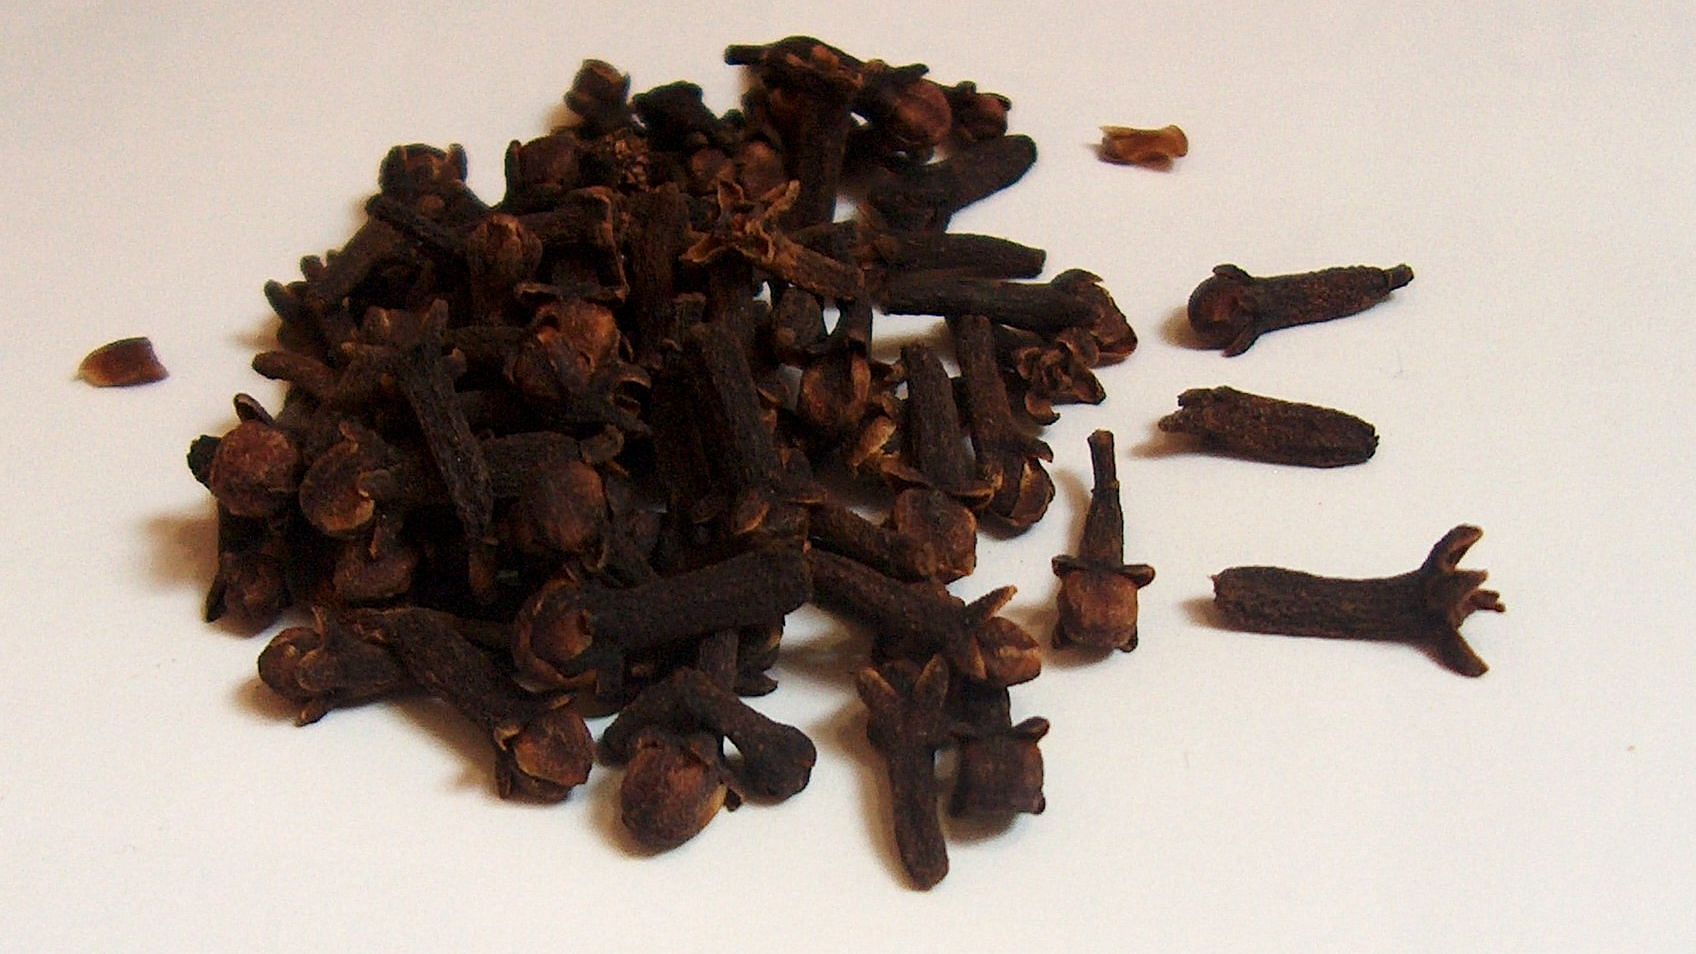 Prized for its flavour and aroma, and also for its medicinal qualities, clove became important for its use as a breath freshener, perfume and food flavouring.